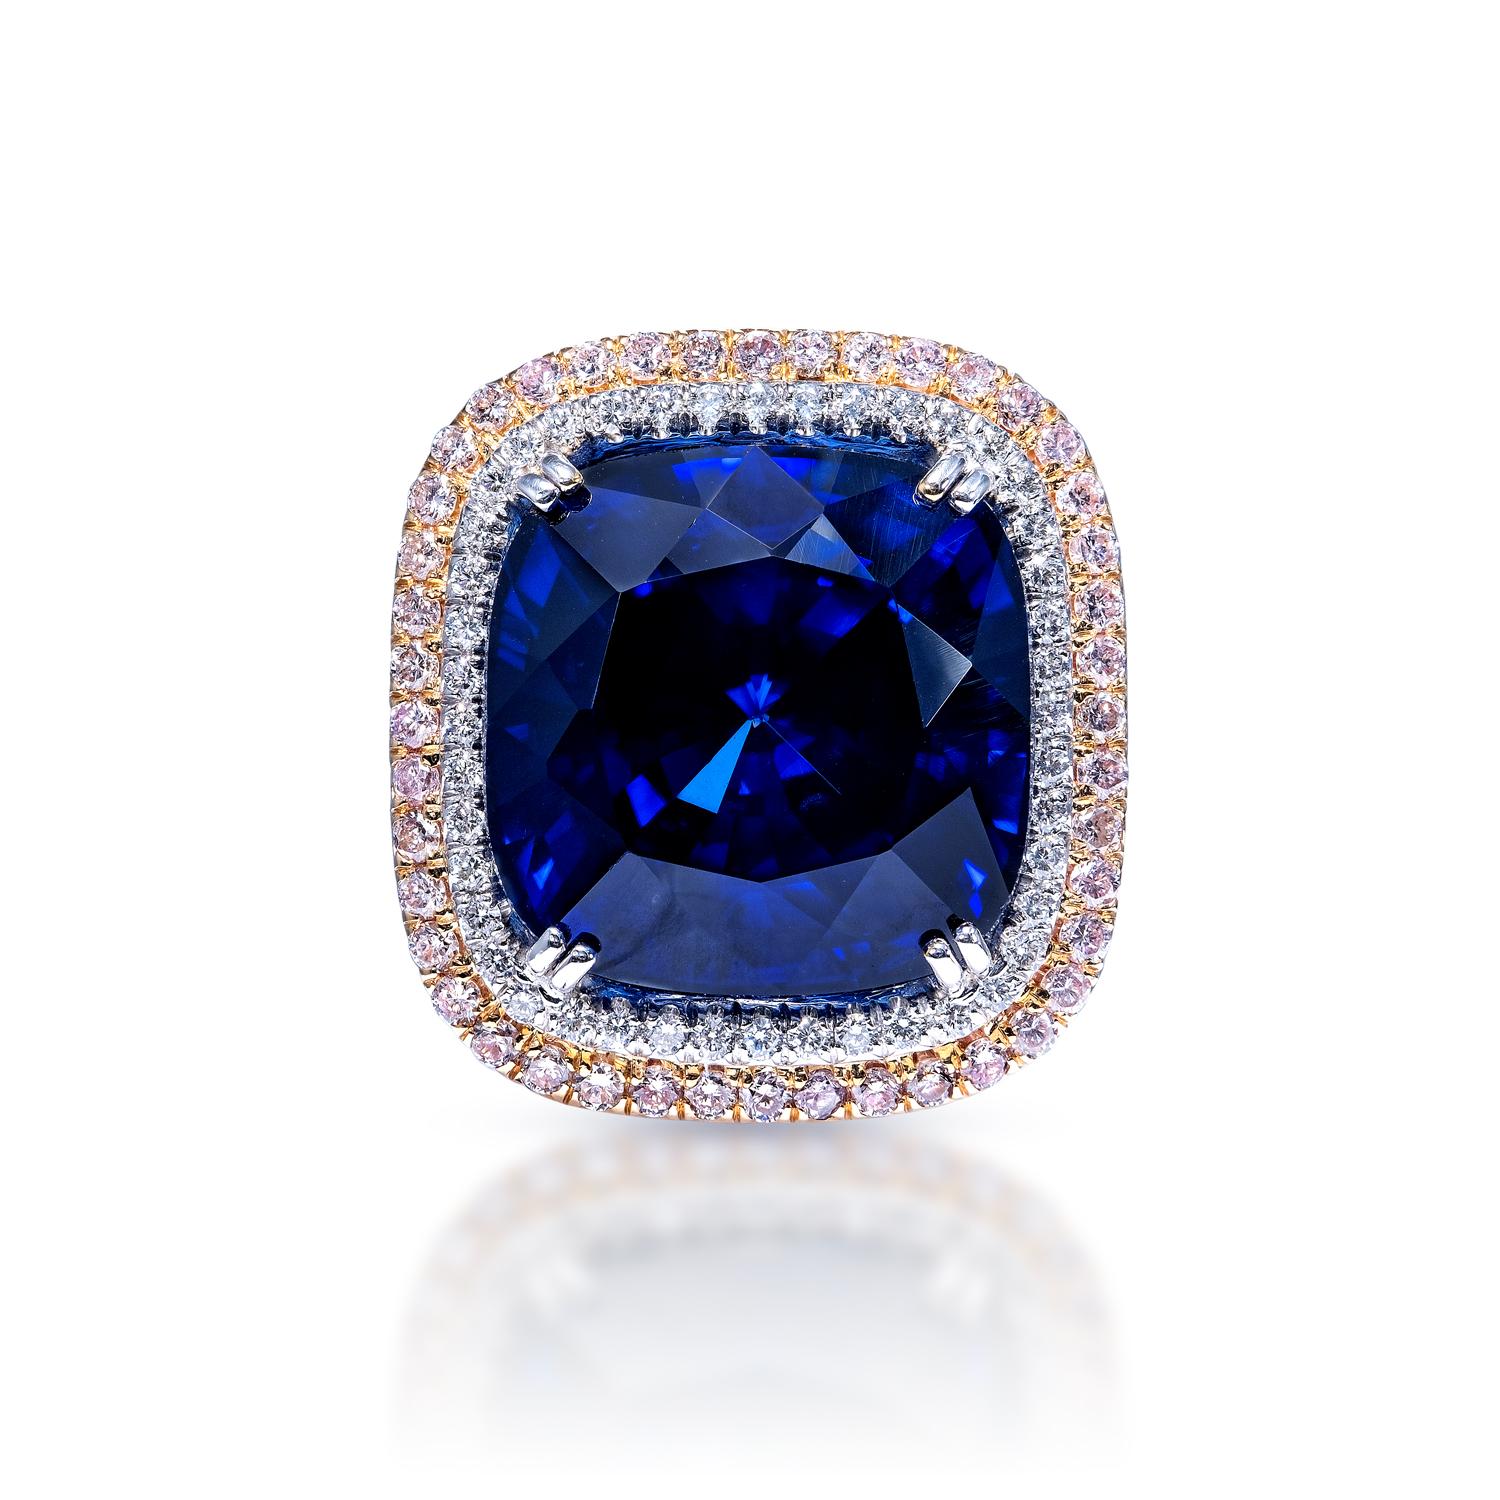 EGL Certified

Center Stone Sapphire Ring:
Carat Weight: 29.85 Carats
Color: Blue Sapphire - Diffused J’adore Sapphire
Style: Cushion Cut

Inner Halo:
Carat Weight: 1.00 Carats
Shape: Round Brilliant Cut

Outer Halo:
Carat Weight: 0.86 Carats
Color: